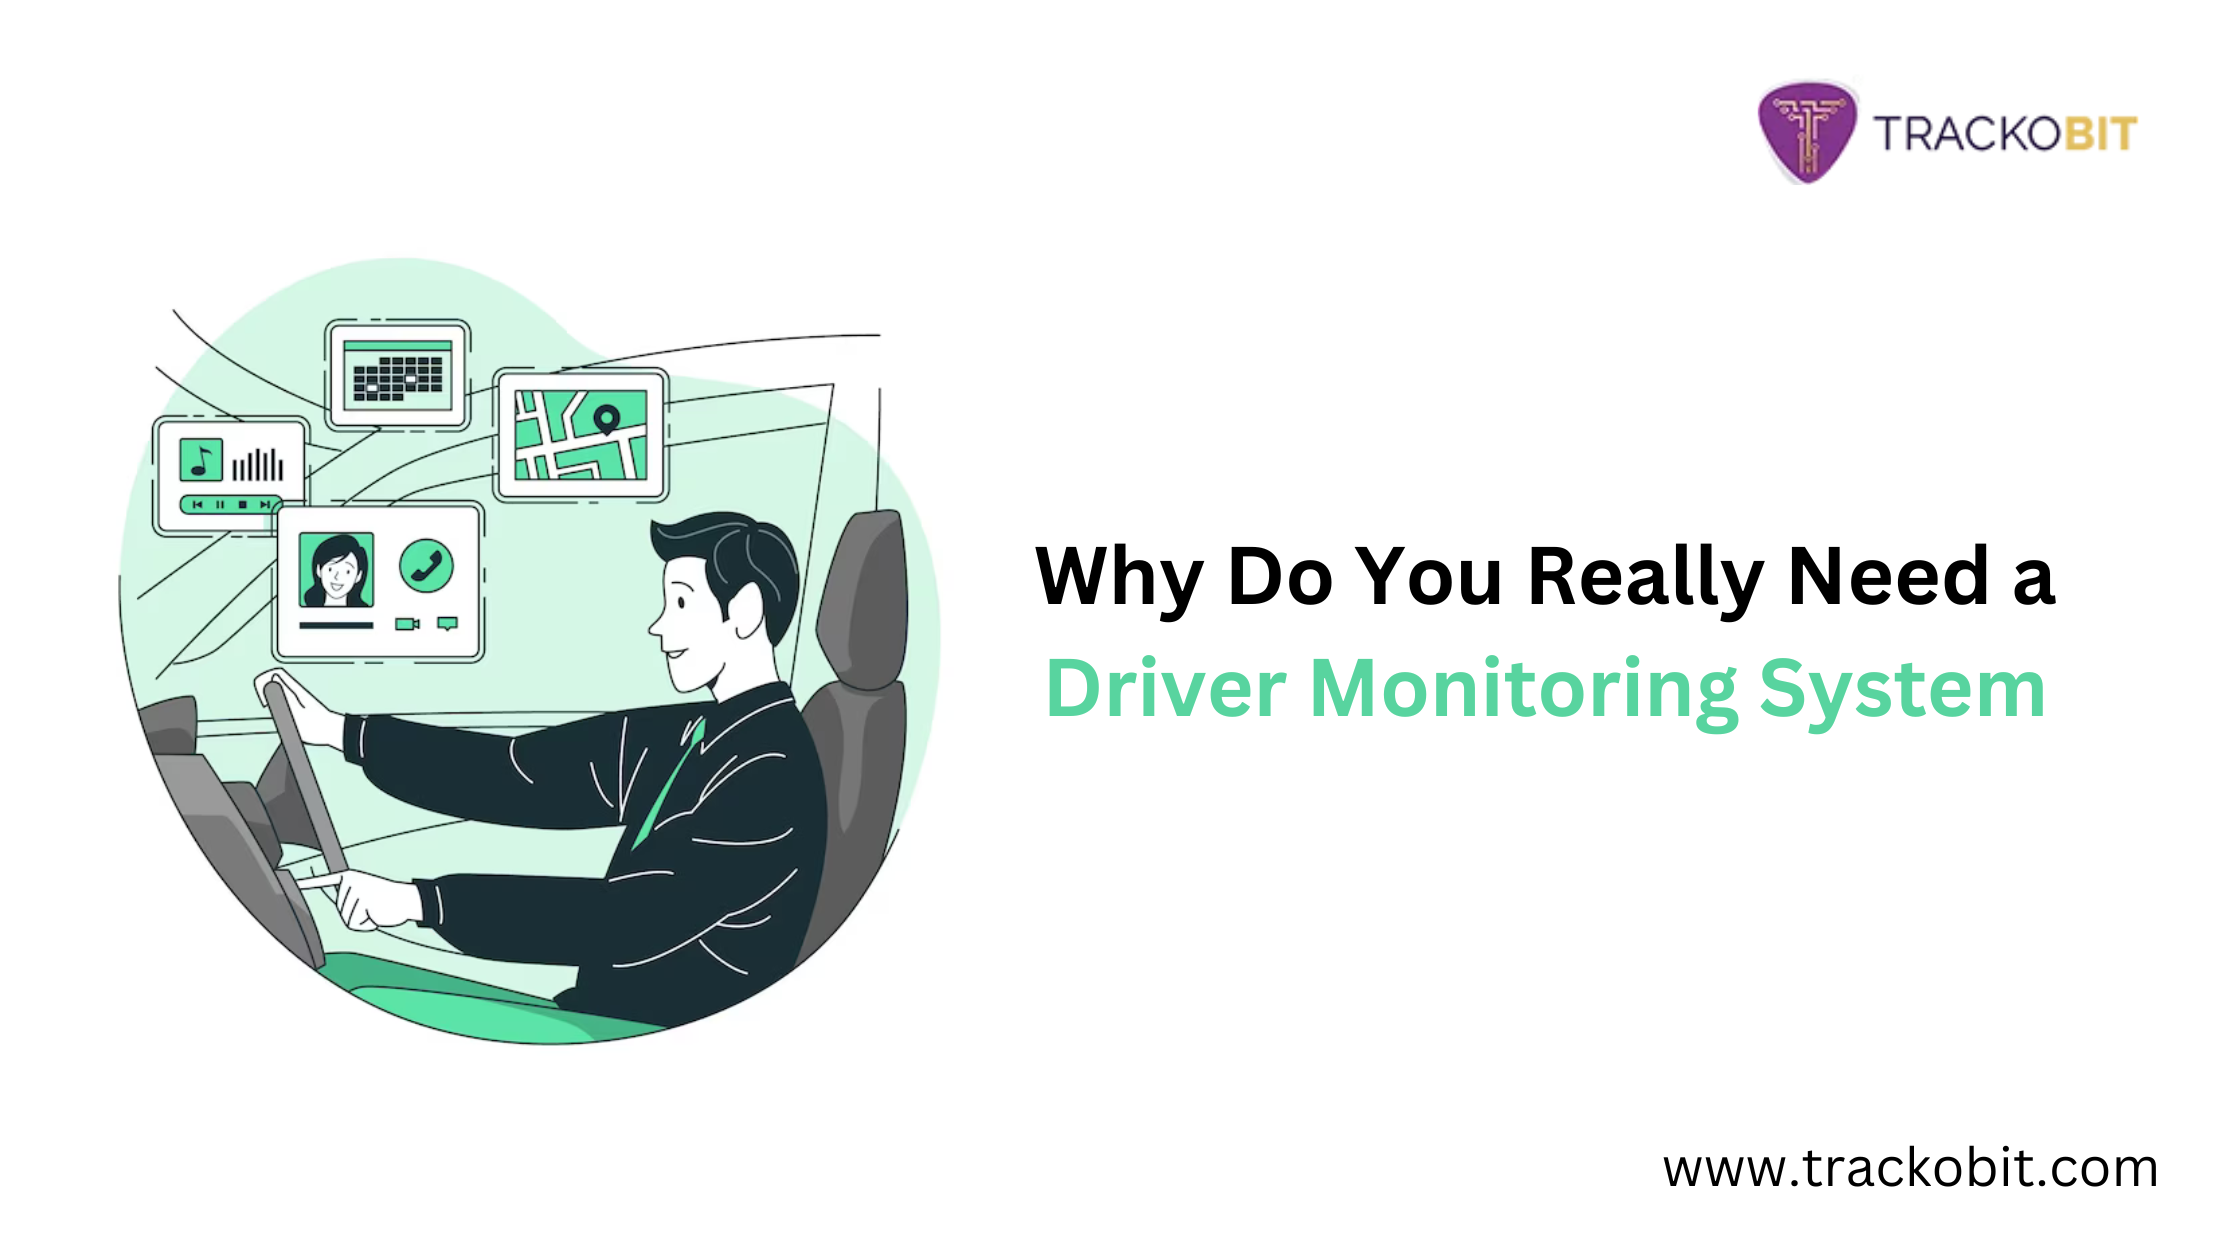 Why Do You Really Need a Driver Monitoring System